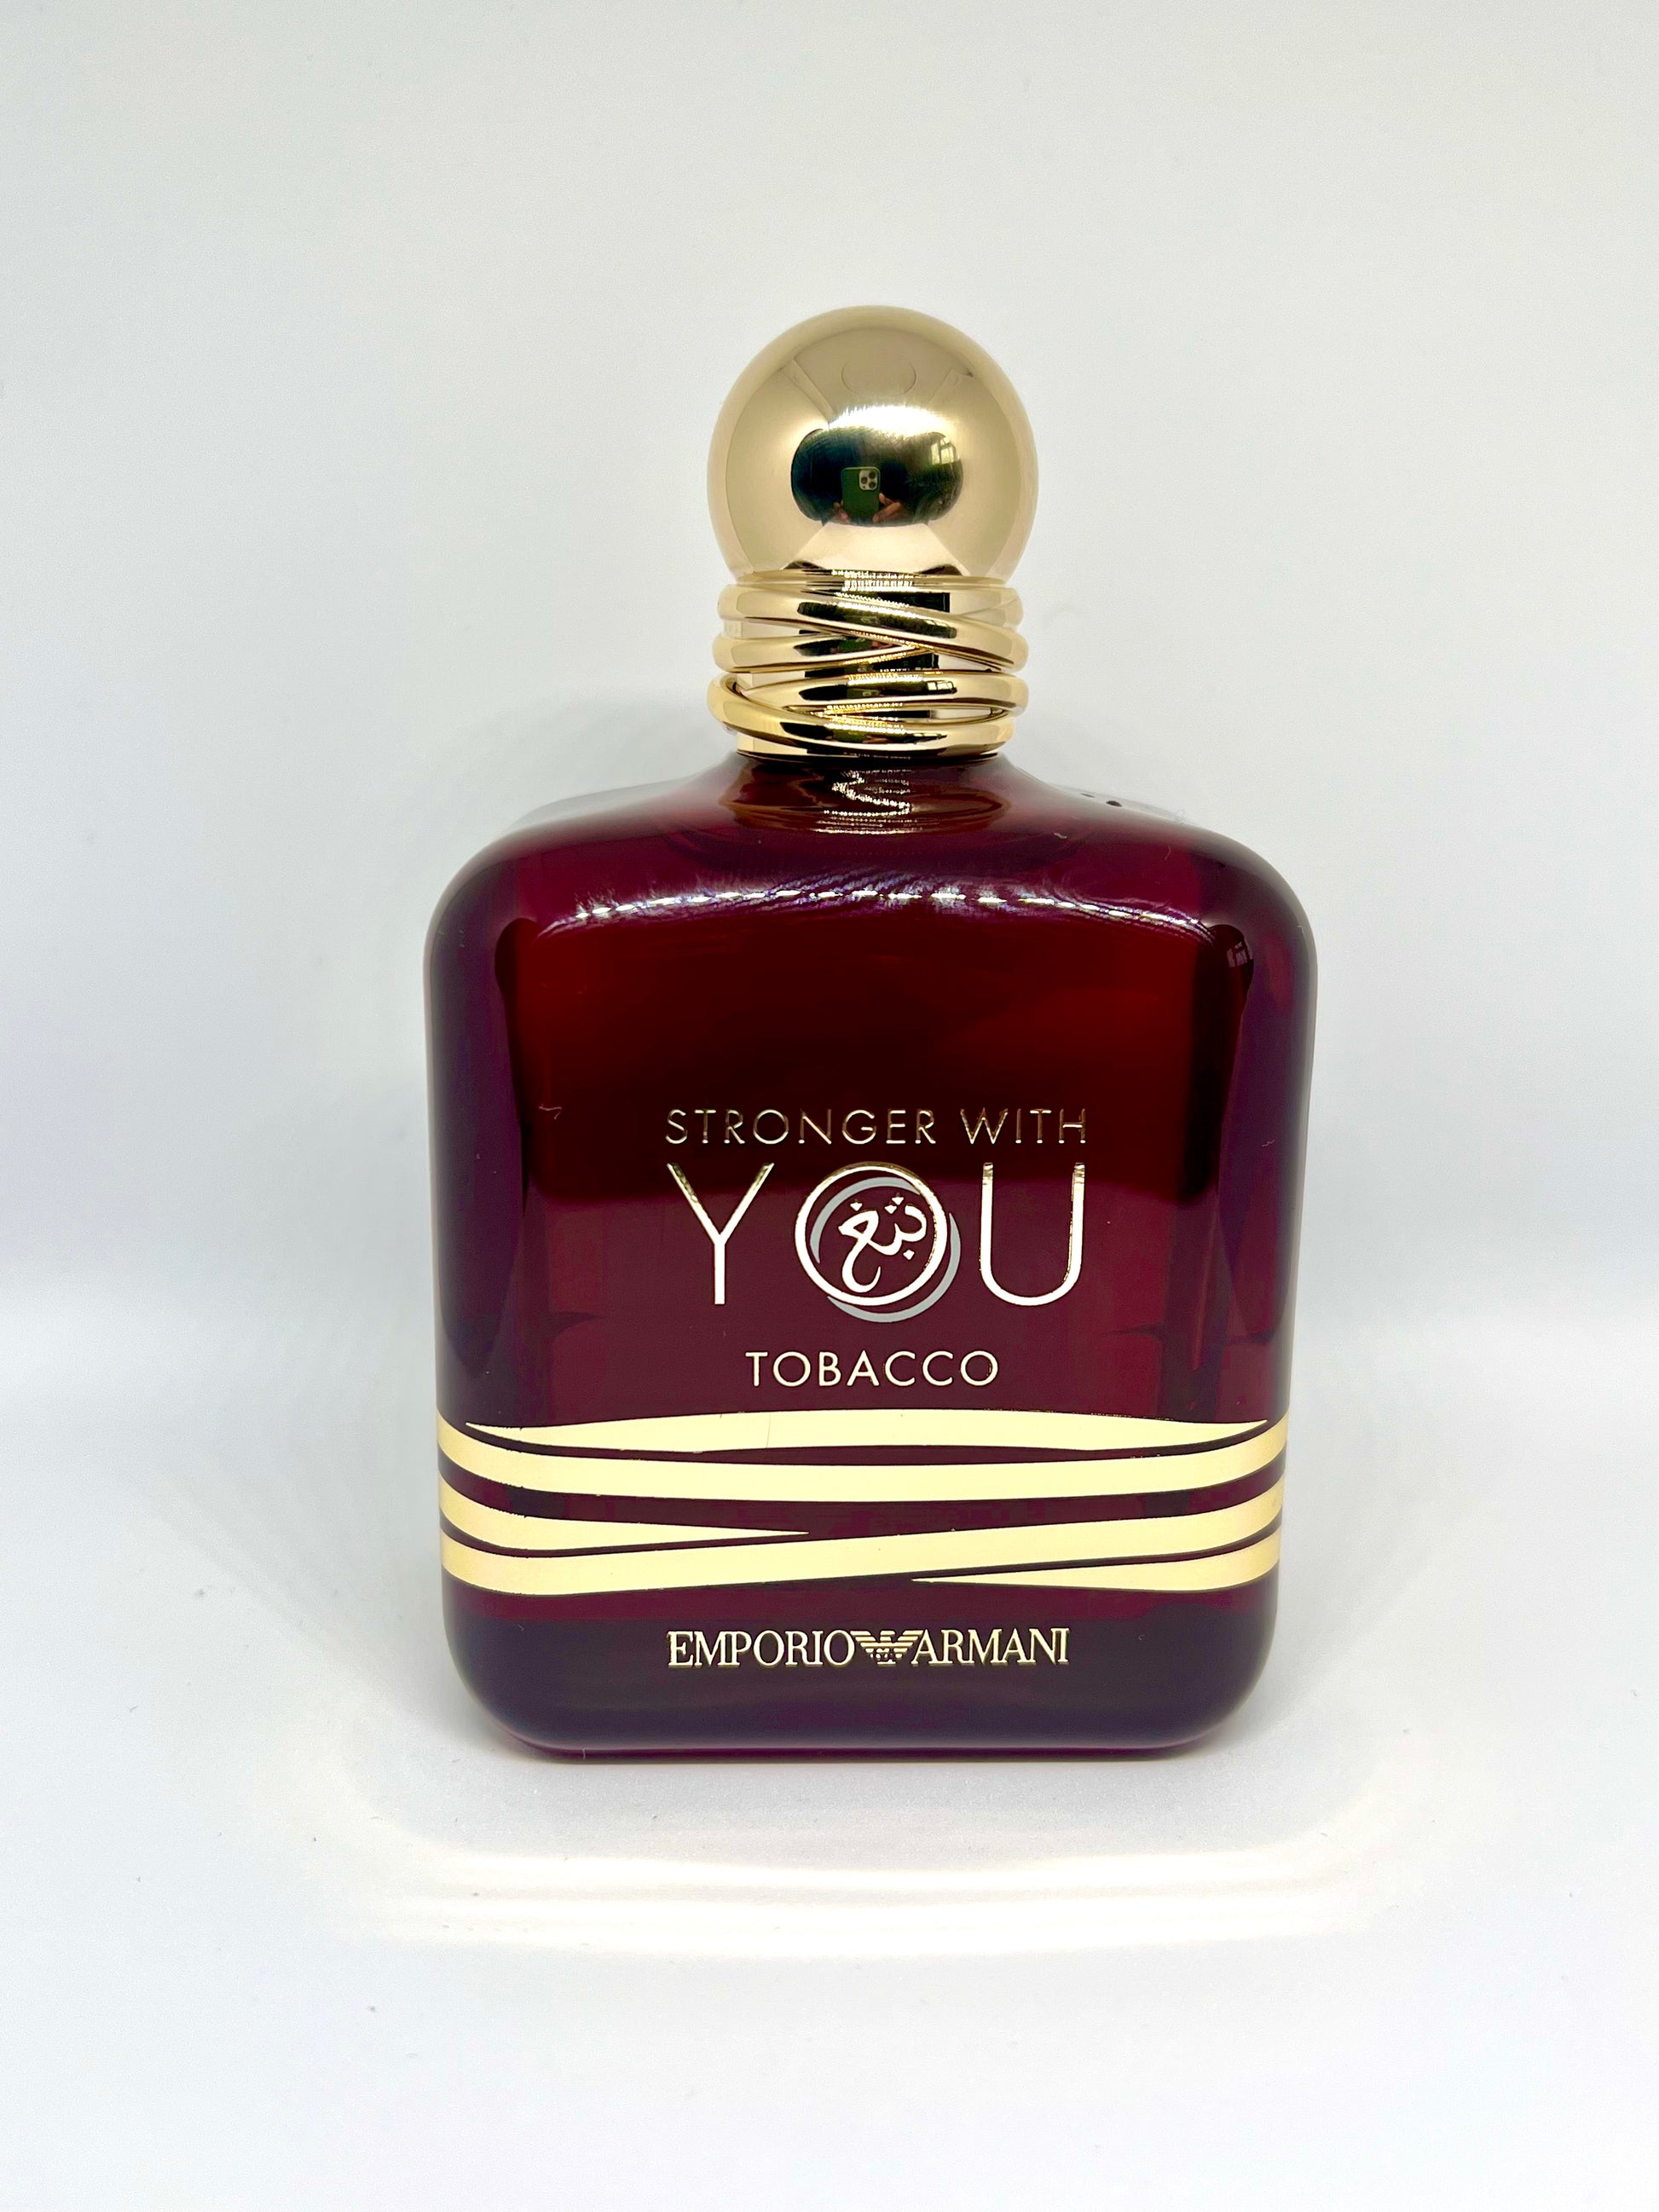 Armani - Stronger With You Tobacco – TJ Talks Scents